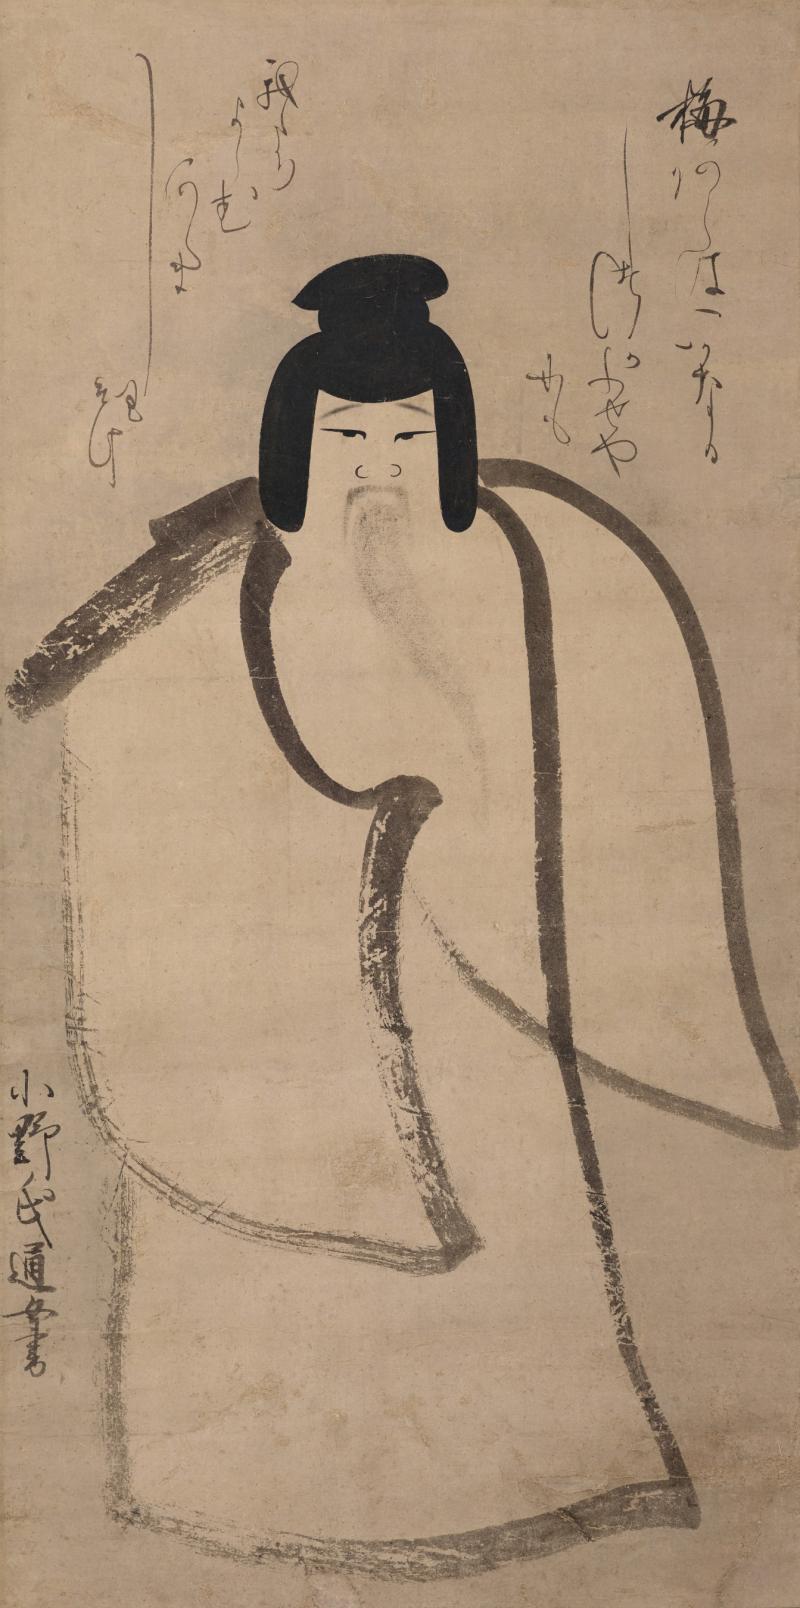 Ink on paper scroll drawing of a Japenese figure